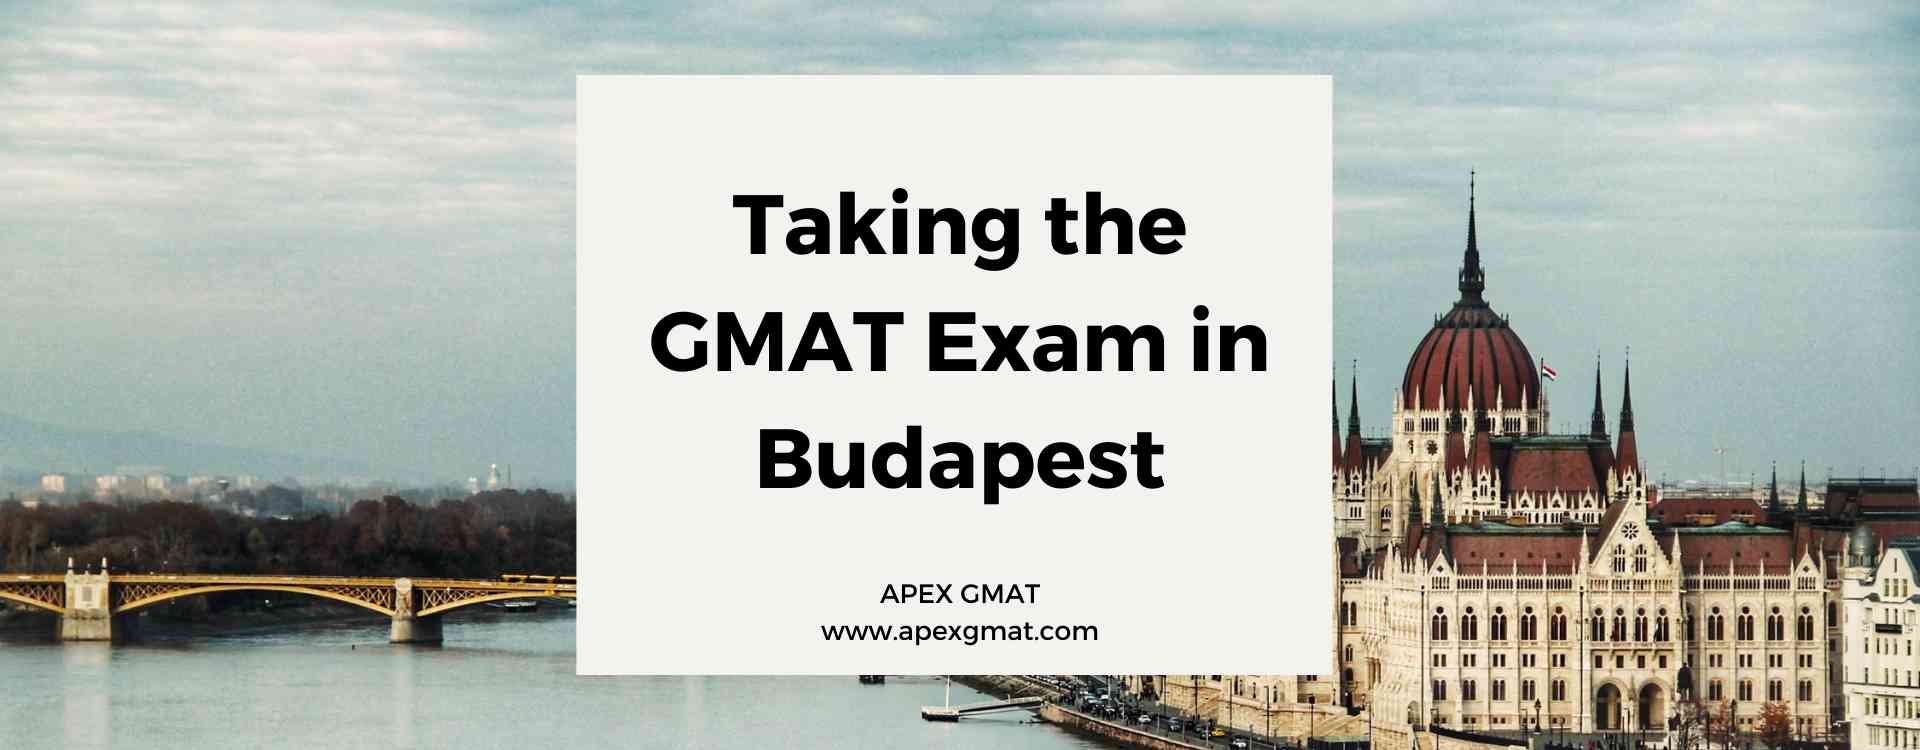 Taking the GMAT Exam in Budapest